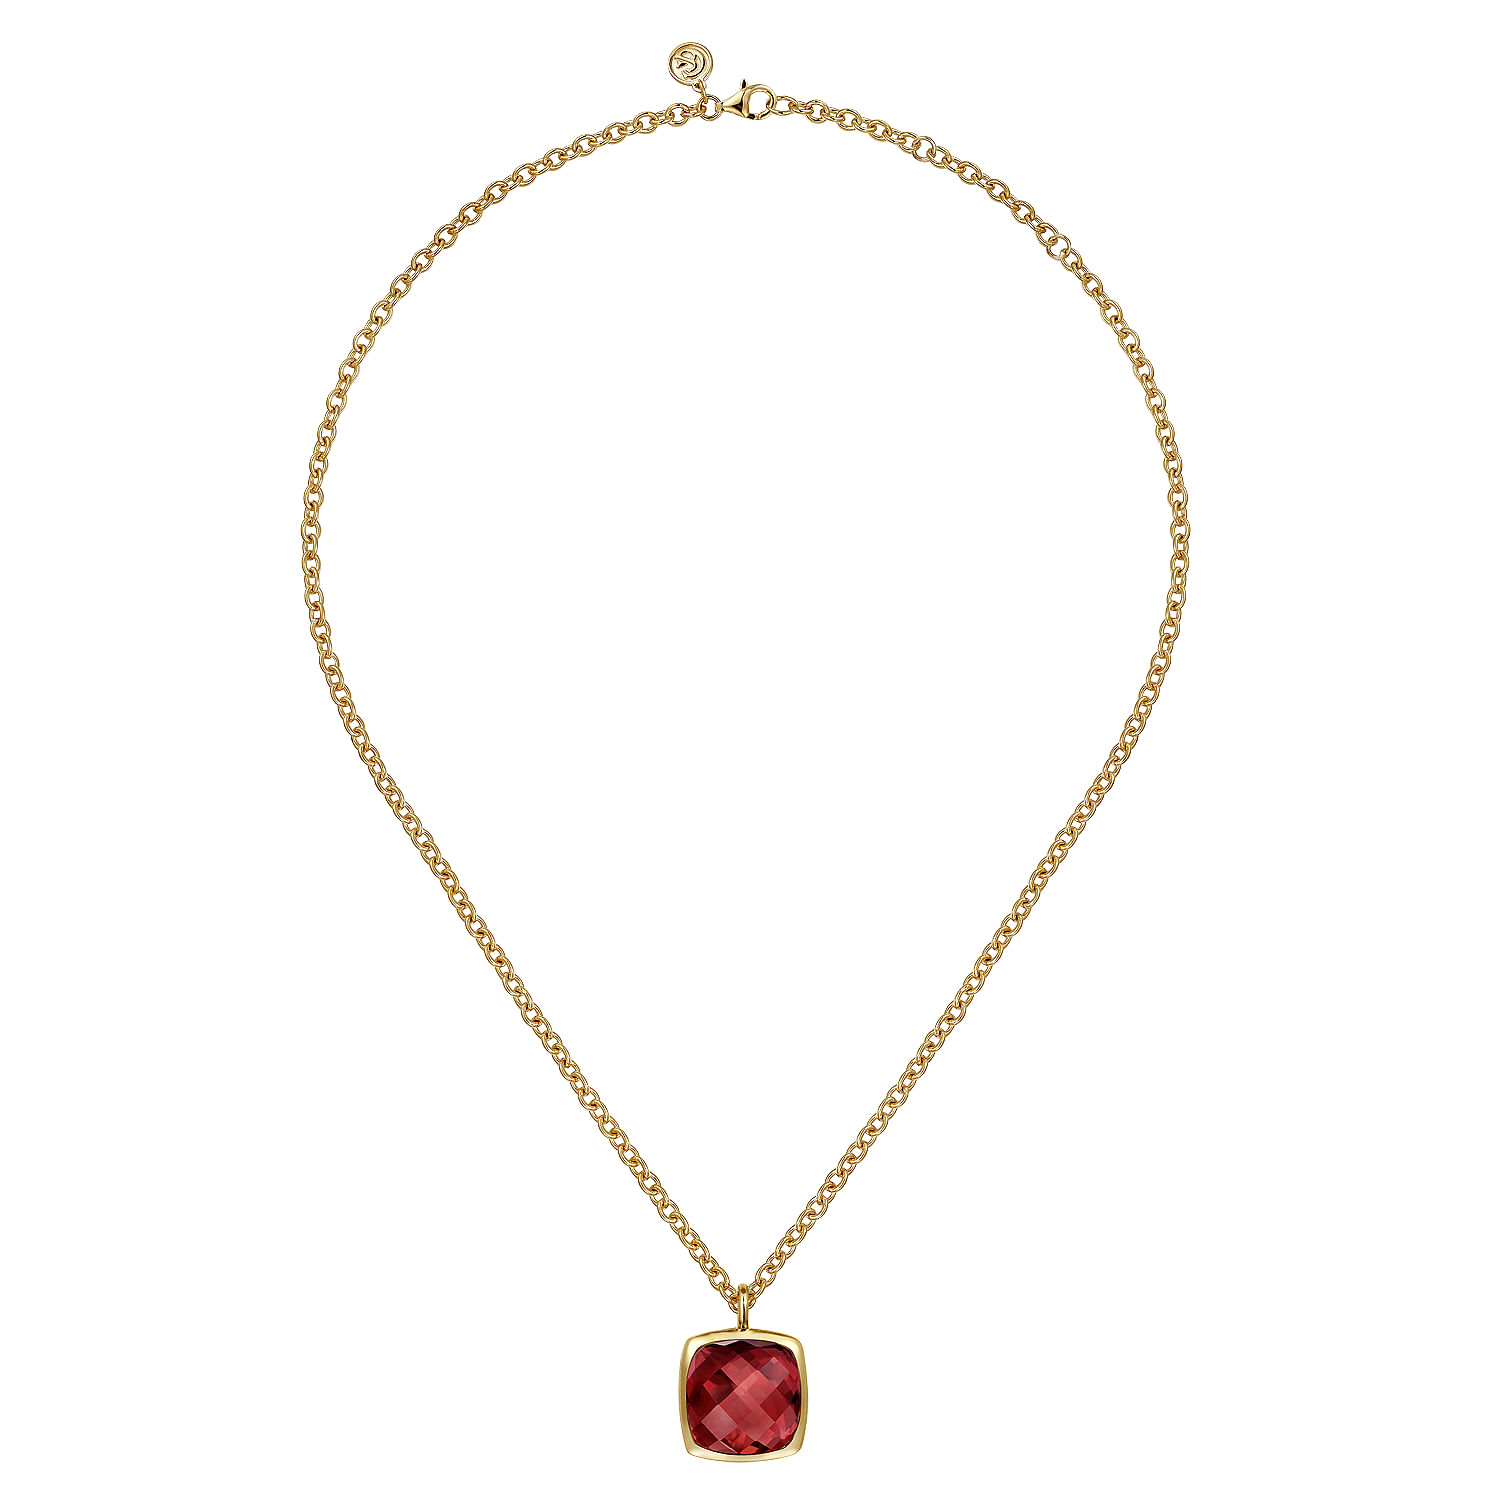 14K Yellow Gold Cushion Cut Garnet Necklace With Flower Pattern J-Back and Bezel Setting